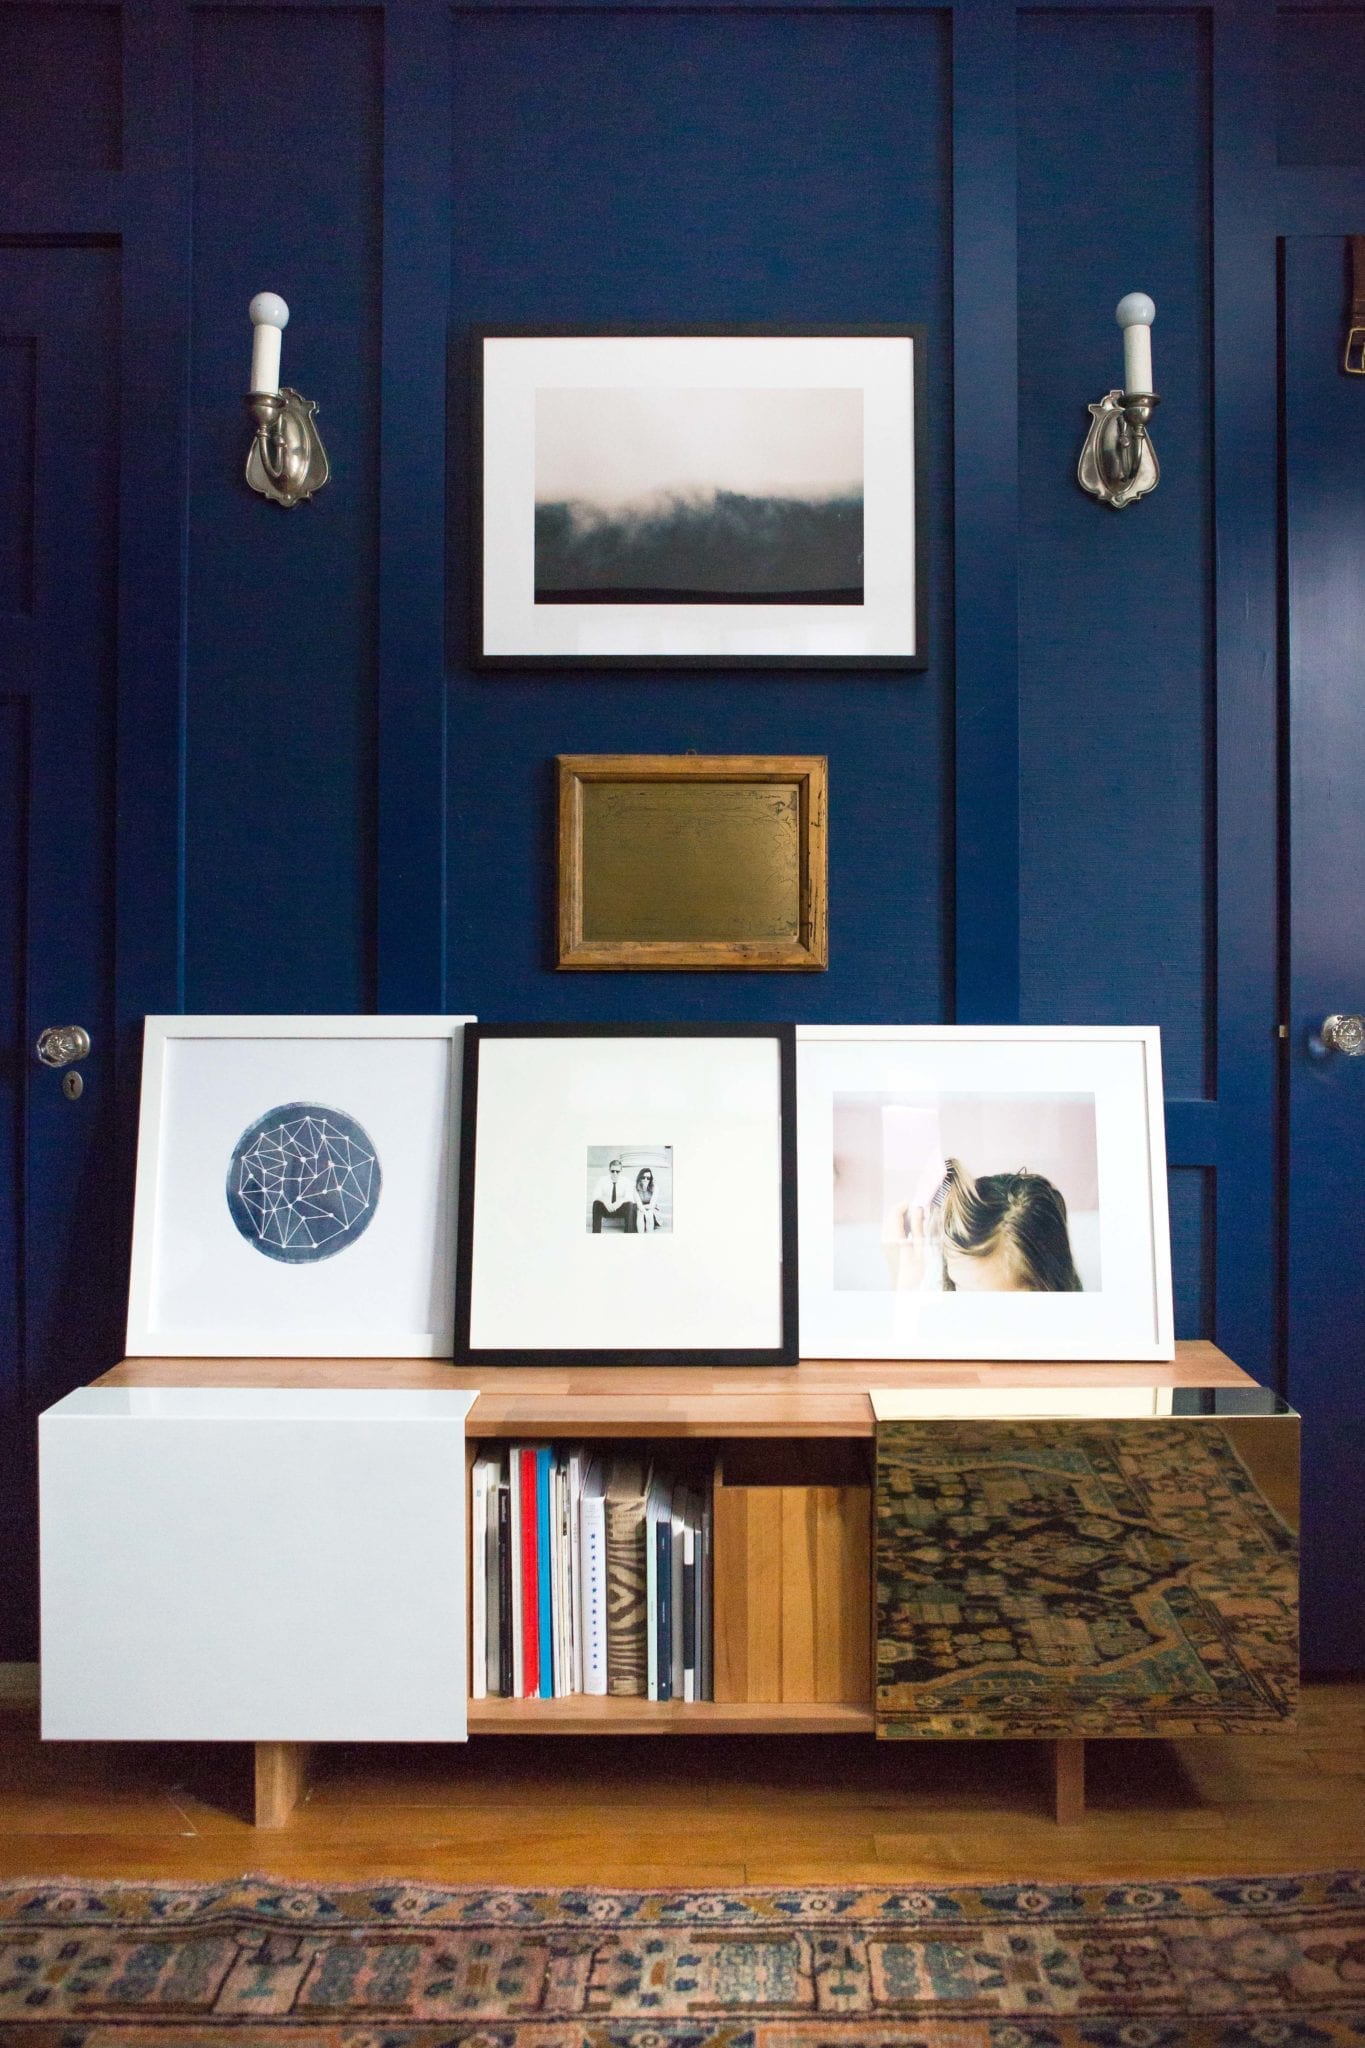 7 Creative Ways to Display Personal Photos, Art, and Keepsakes at Home | Wit & Delight